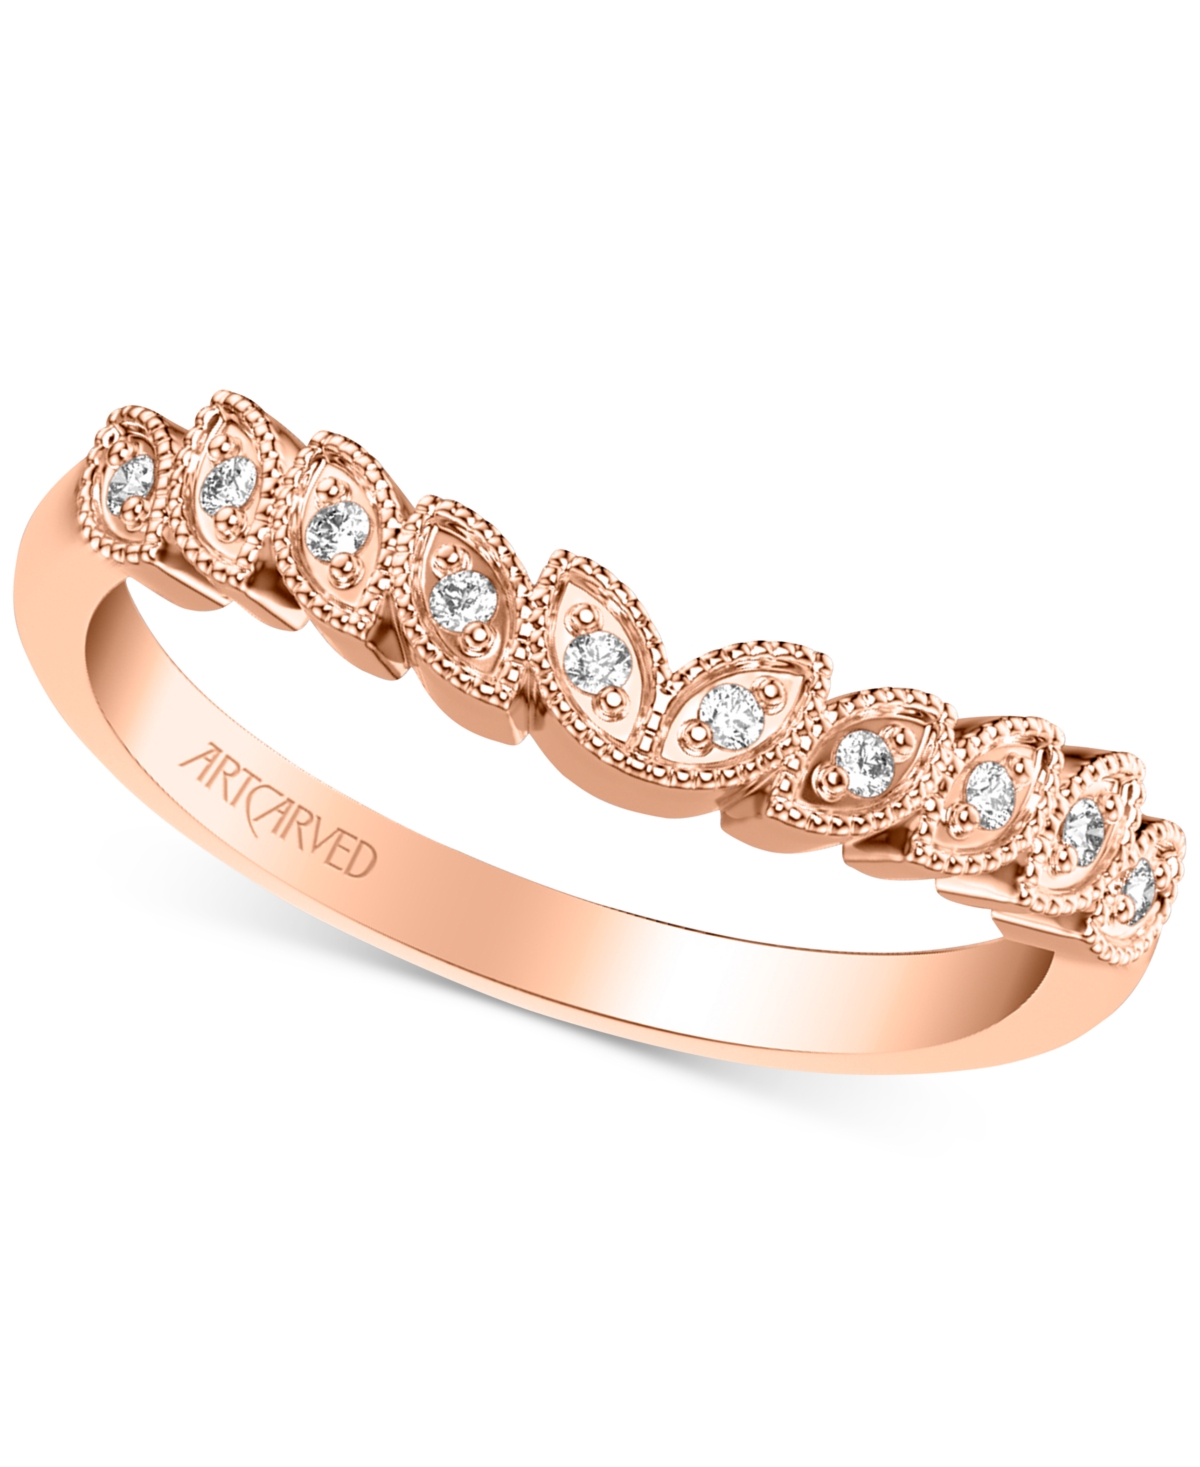 Artcarved Art Carved Diamond Rose-Cut Wedding Band (1/20 ct. t.w.) in 14k White, Yellow or Rose Gold